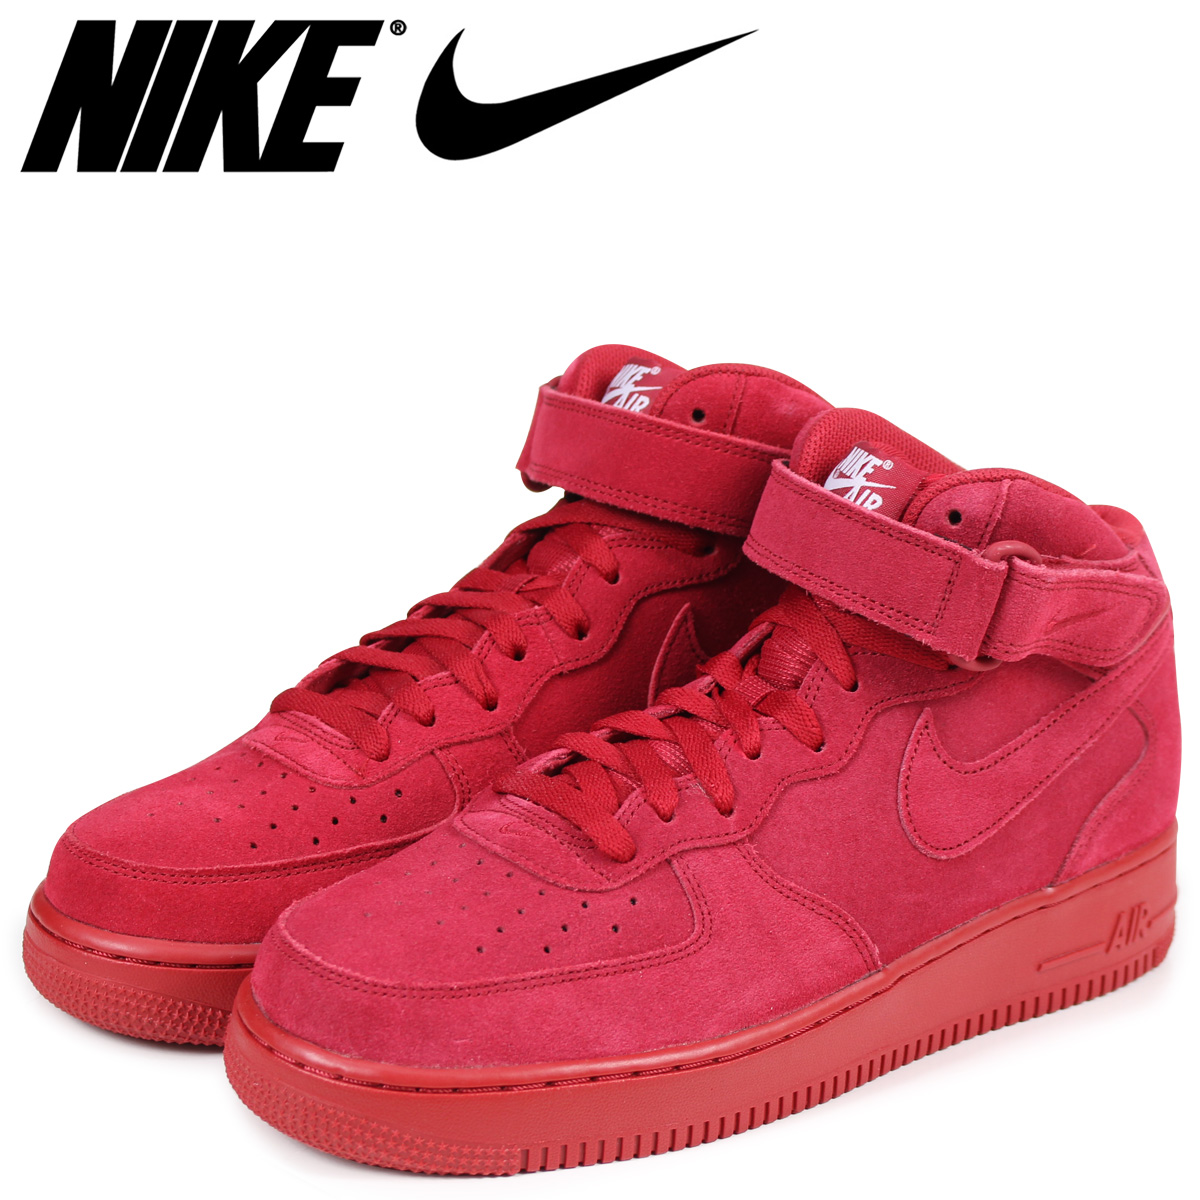 nike air force 1 mid men's red